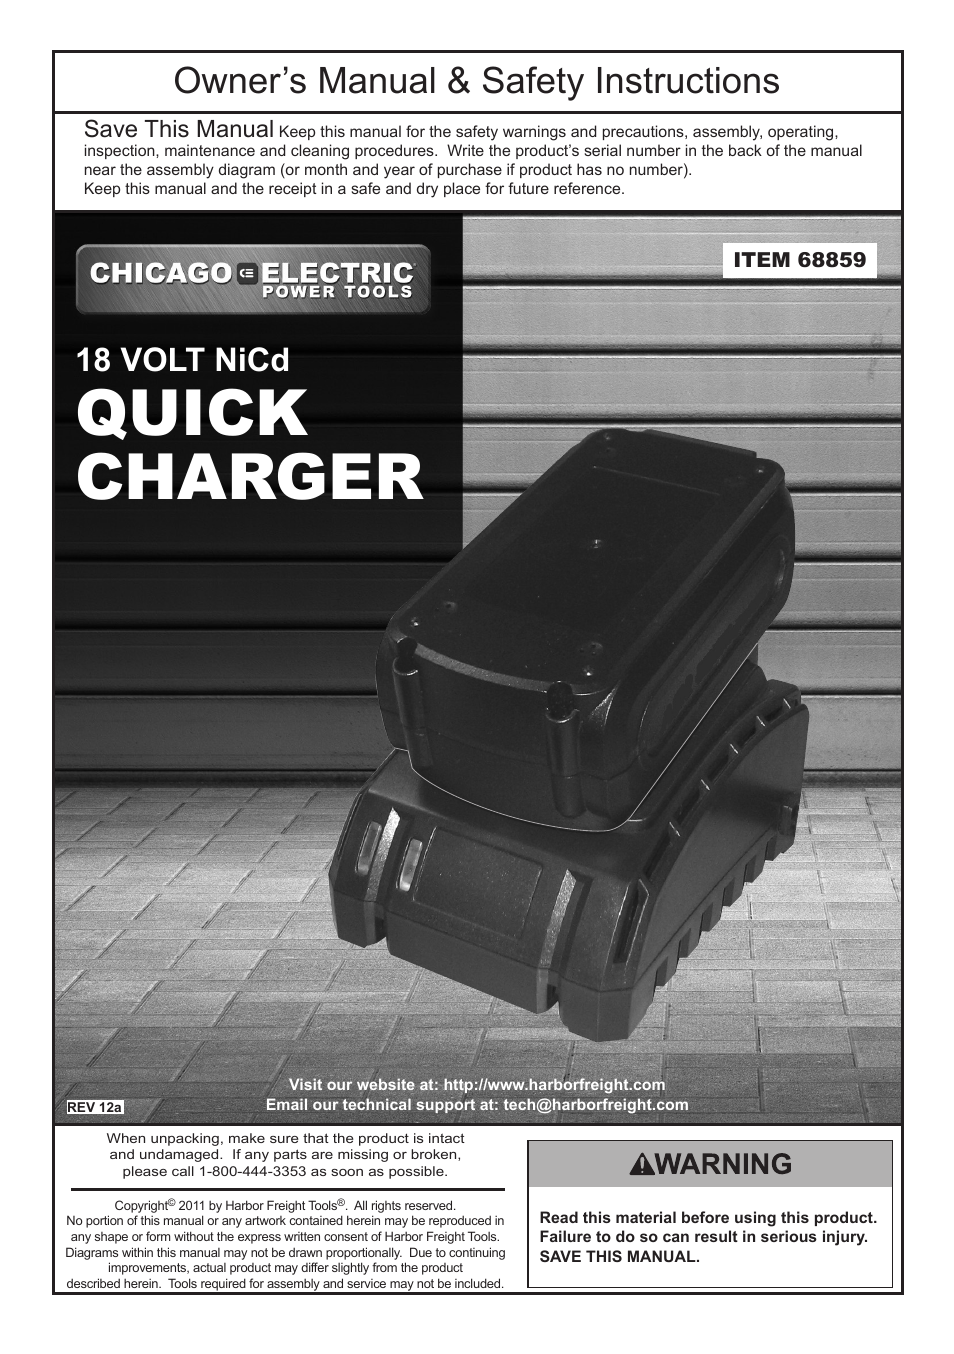 18 Volt NiCd Quick Charger 68859